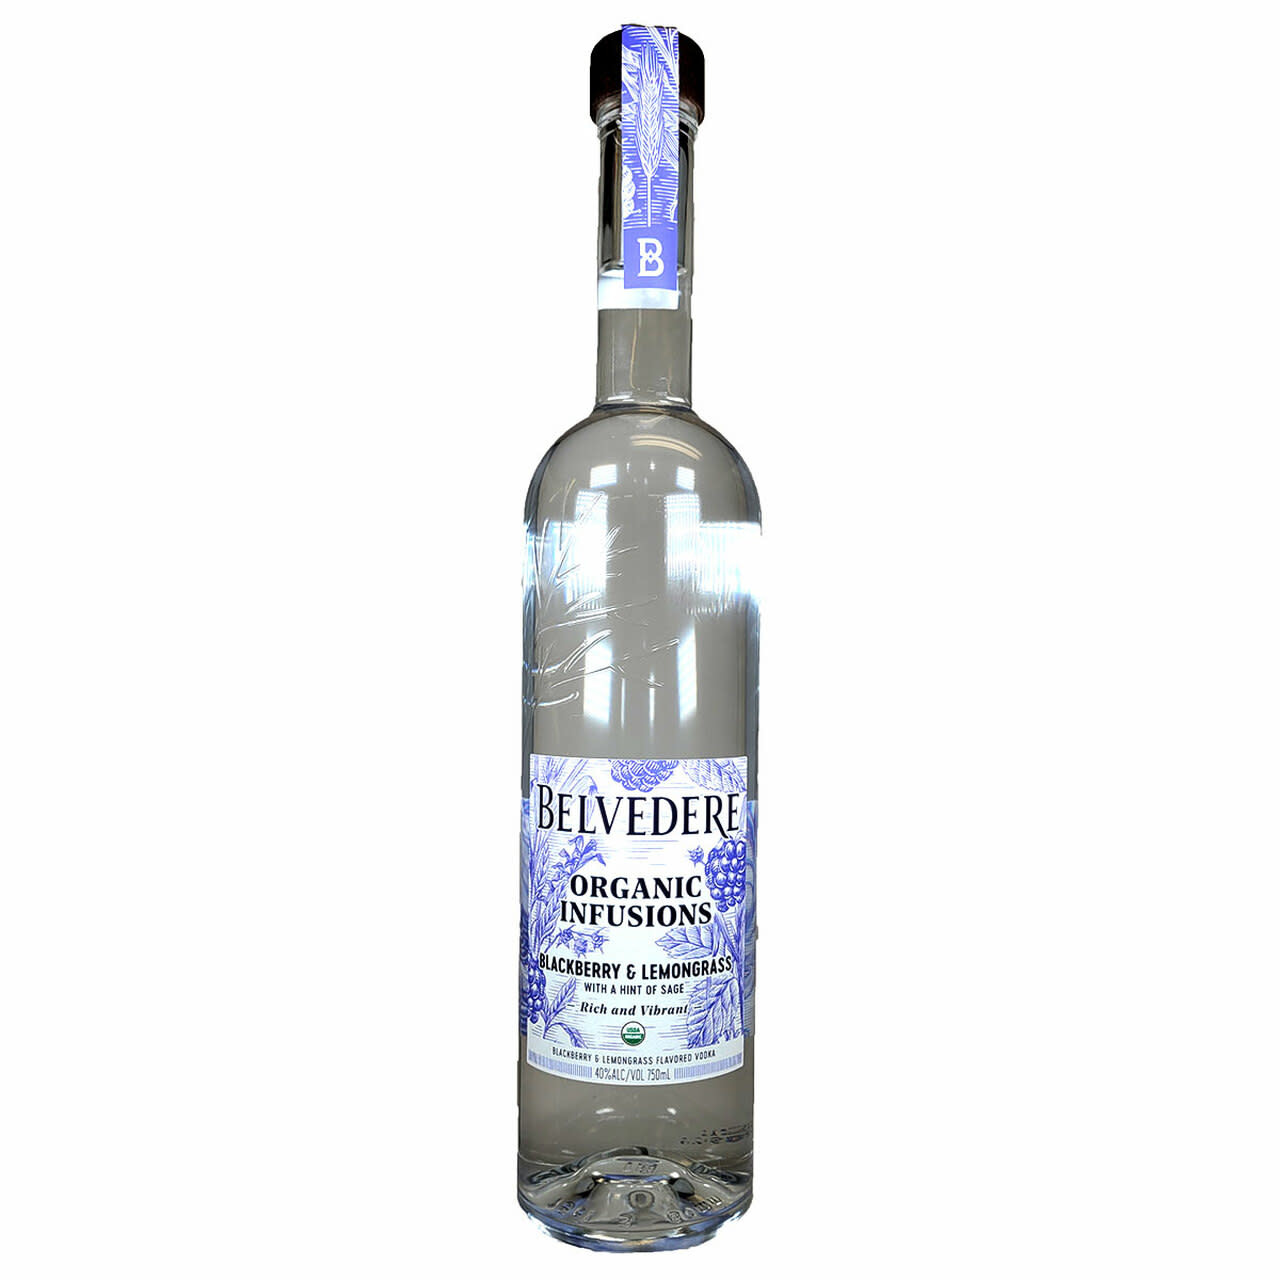 Belvedere Organic Infusions Event Showcases New Line